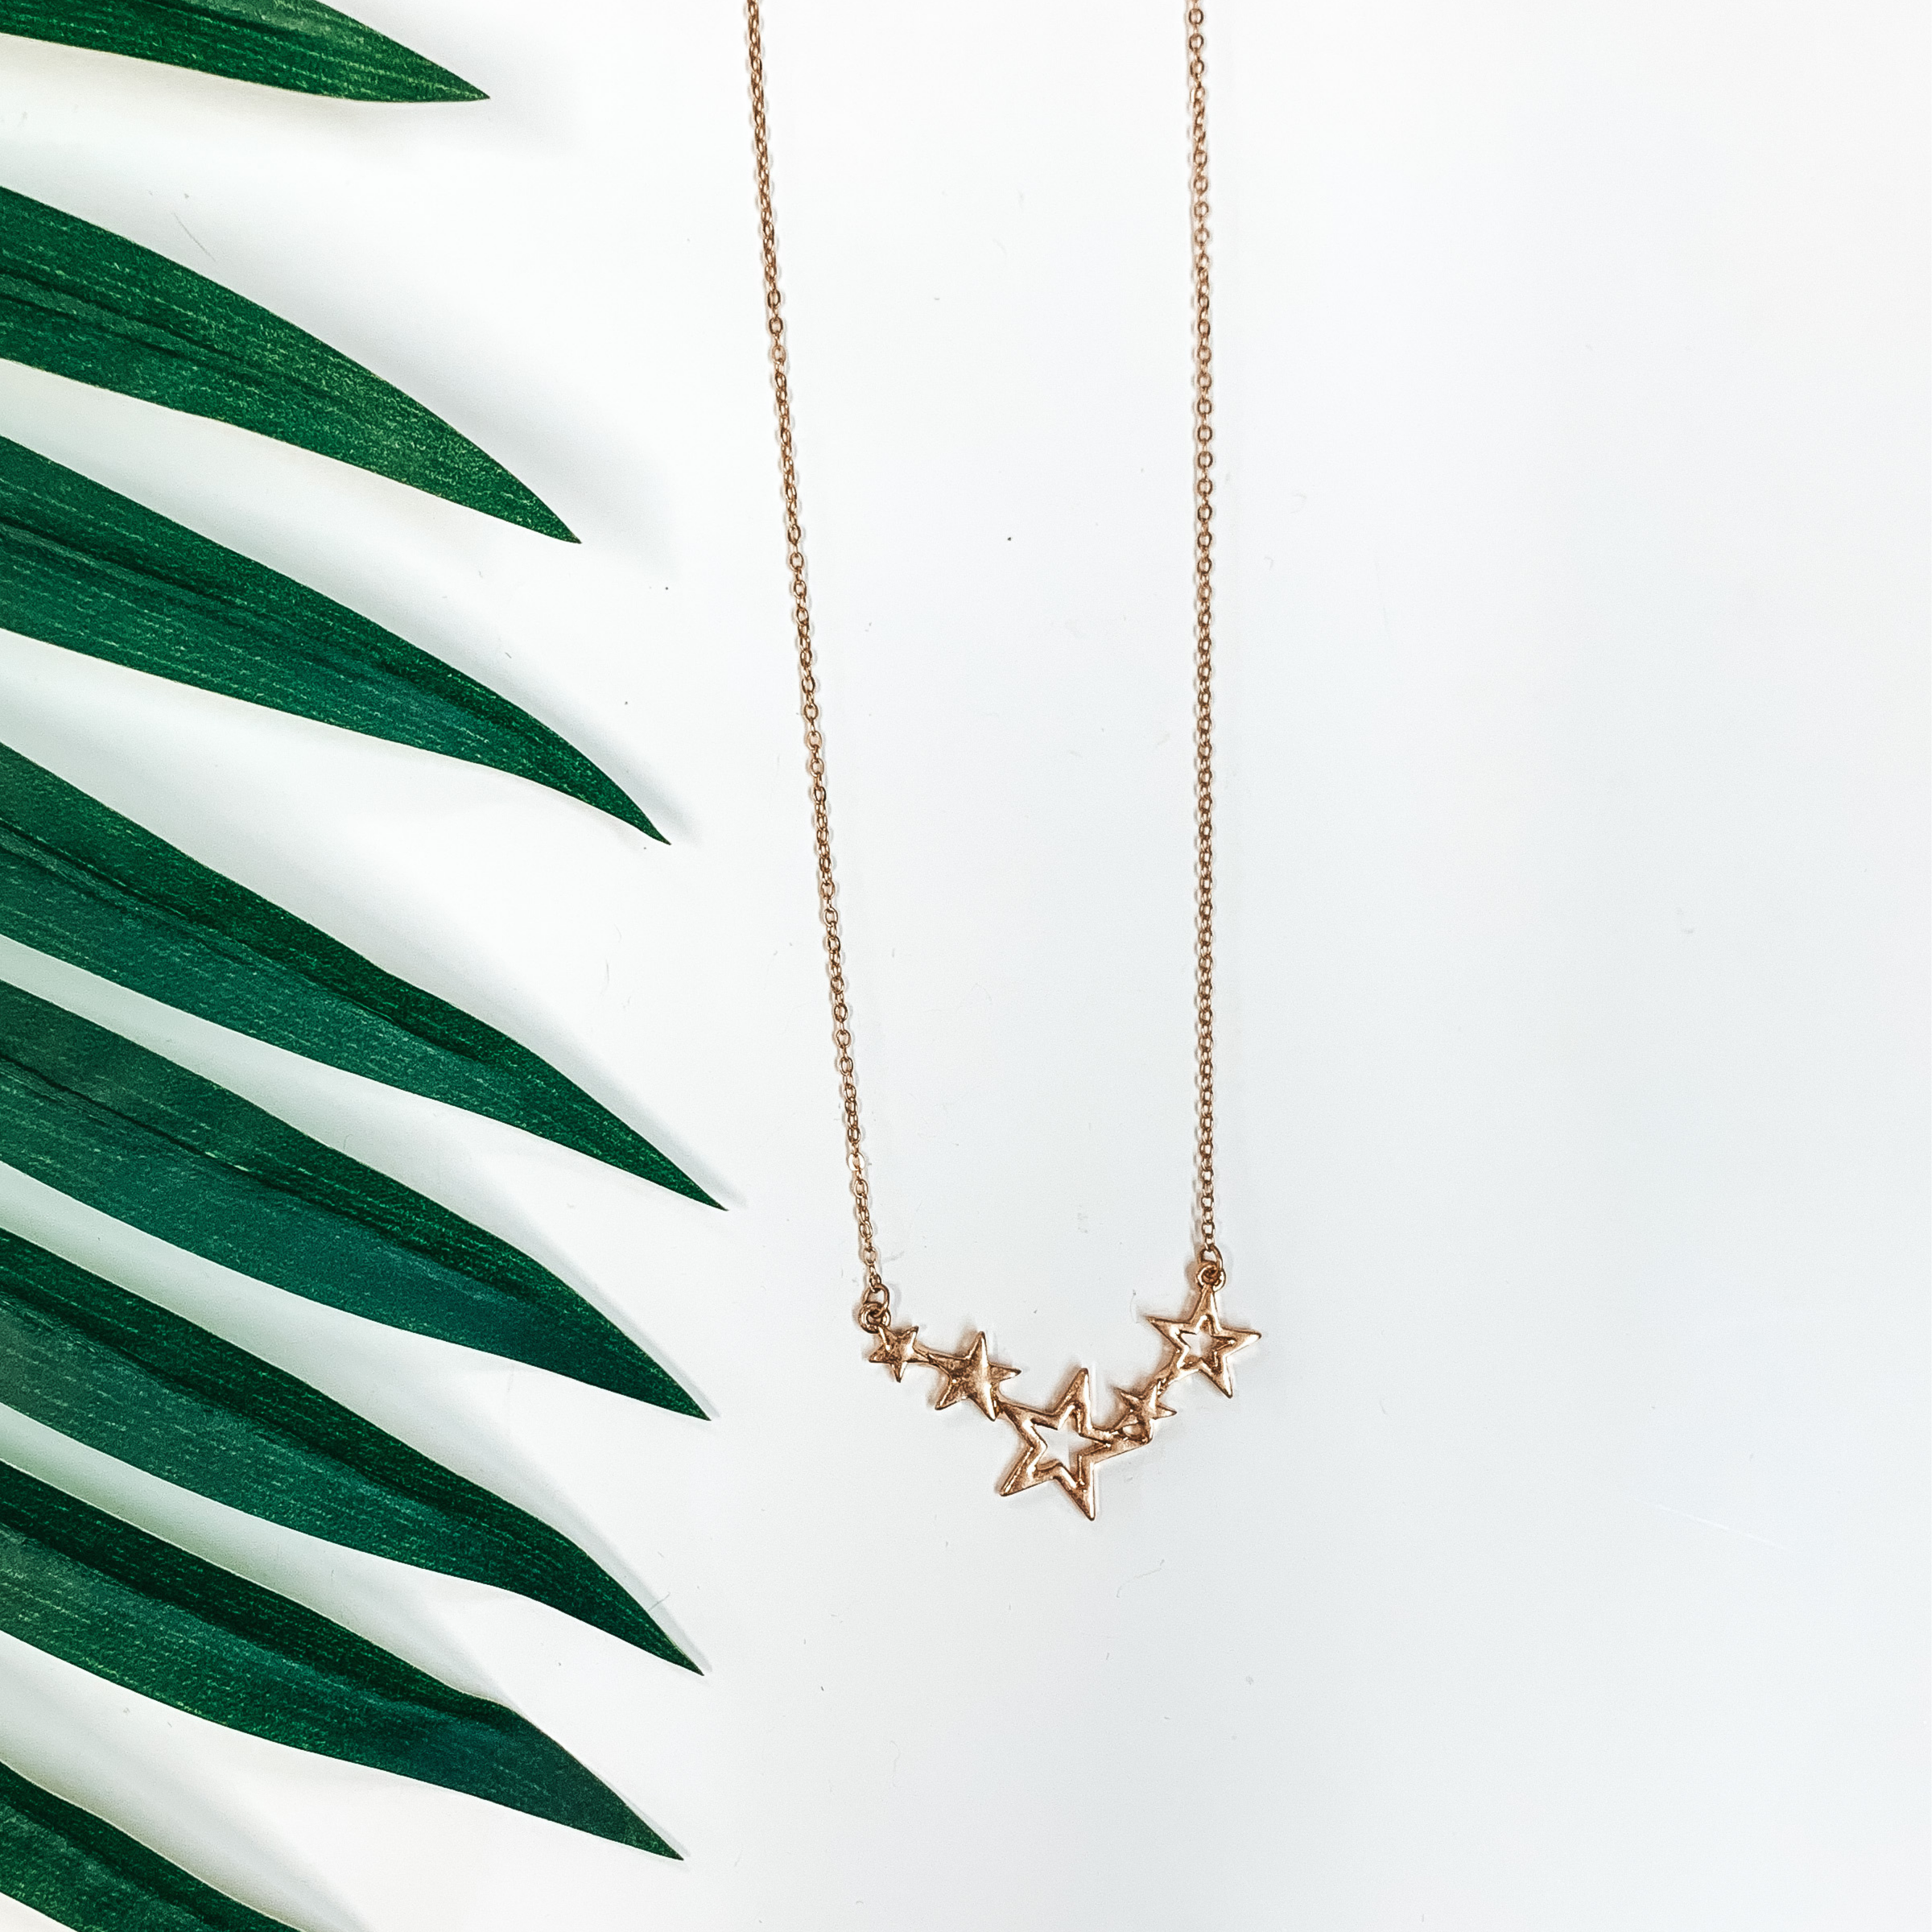 Constellations Necklace in Gold - Giddy Up Glamour Boutique